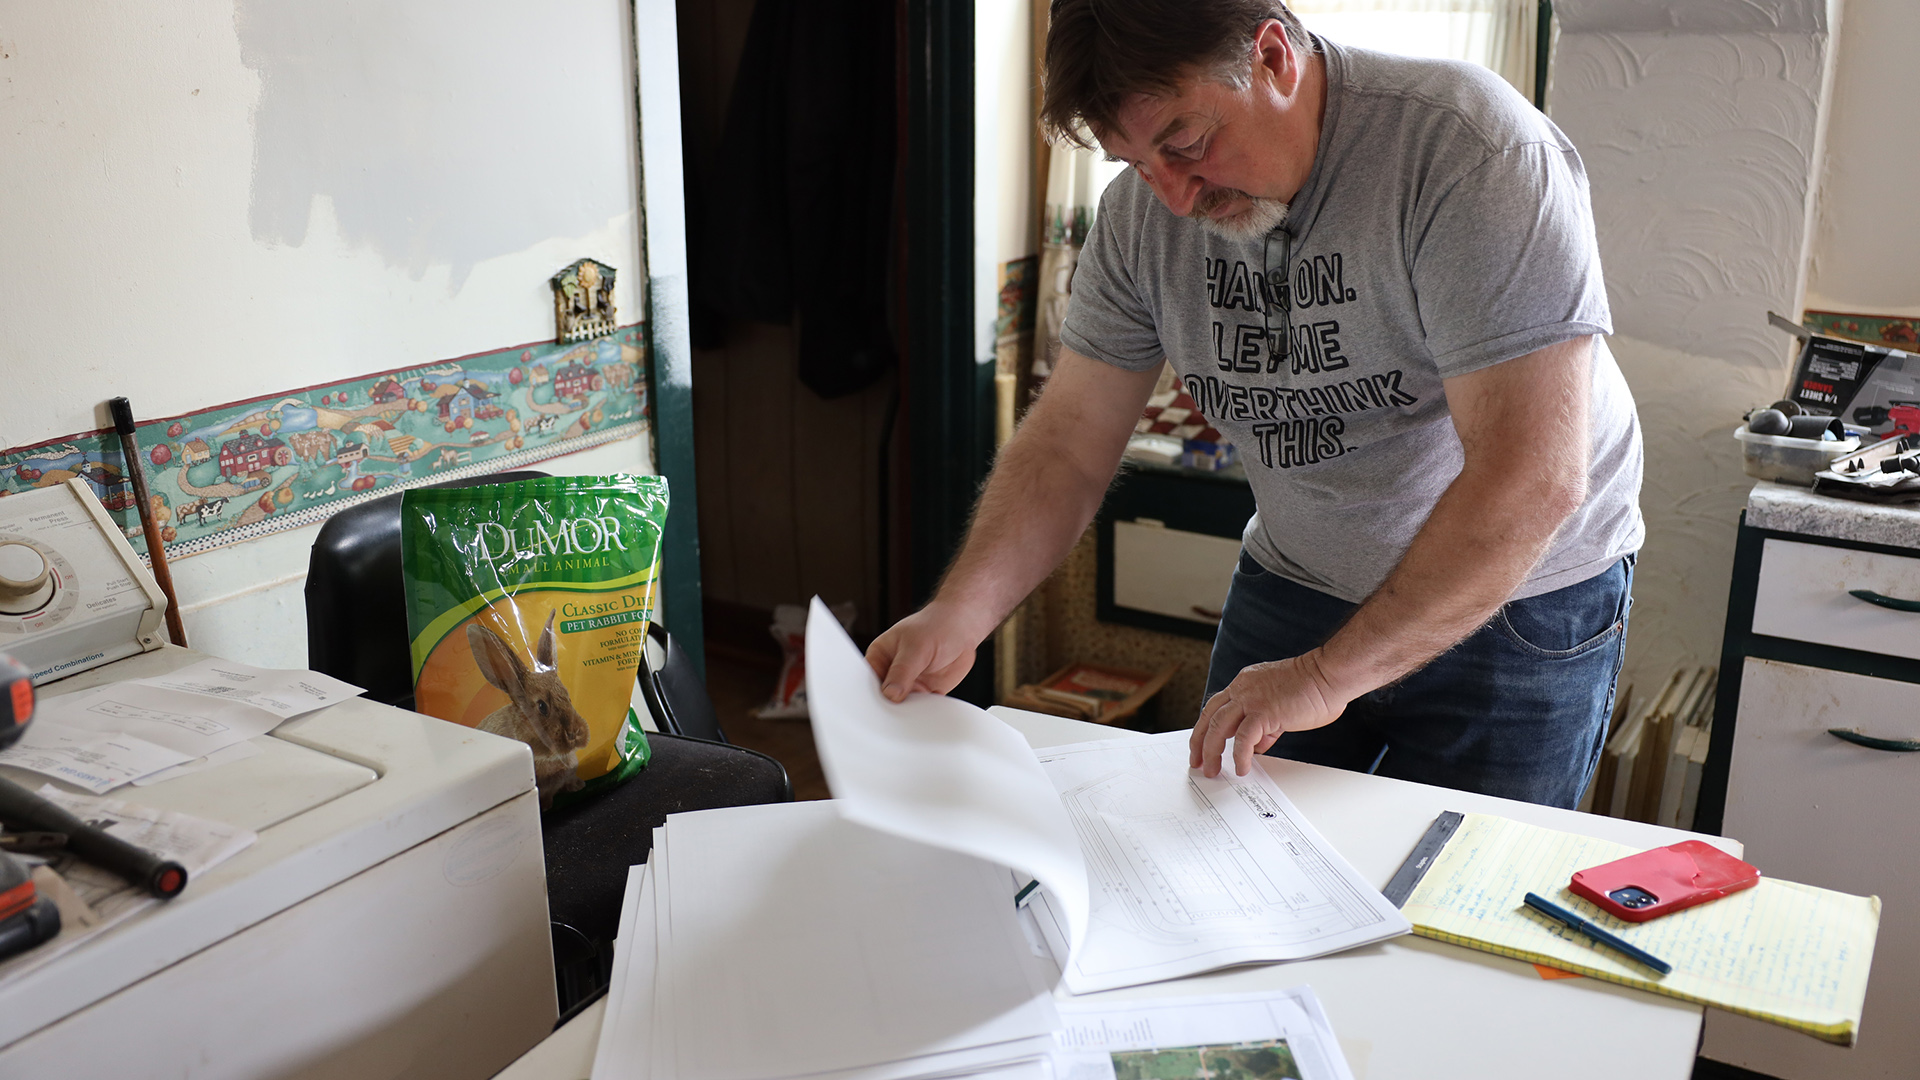 Tim Schmitz stands over a table and pages through documents, with a legal notepad, smart phone and pen on its surface, in a room with a washing machine, cabinets and chairs.